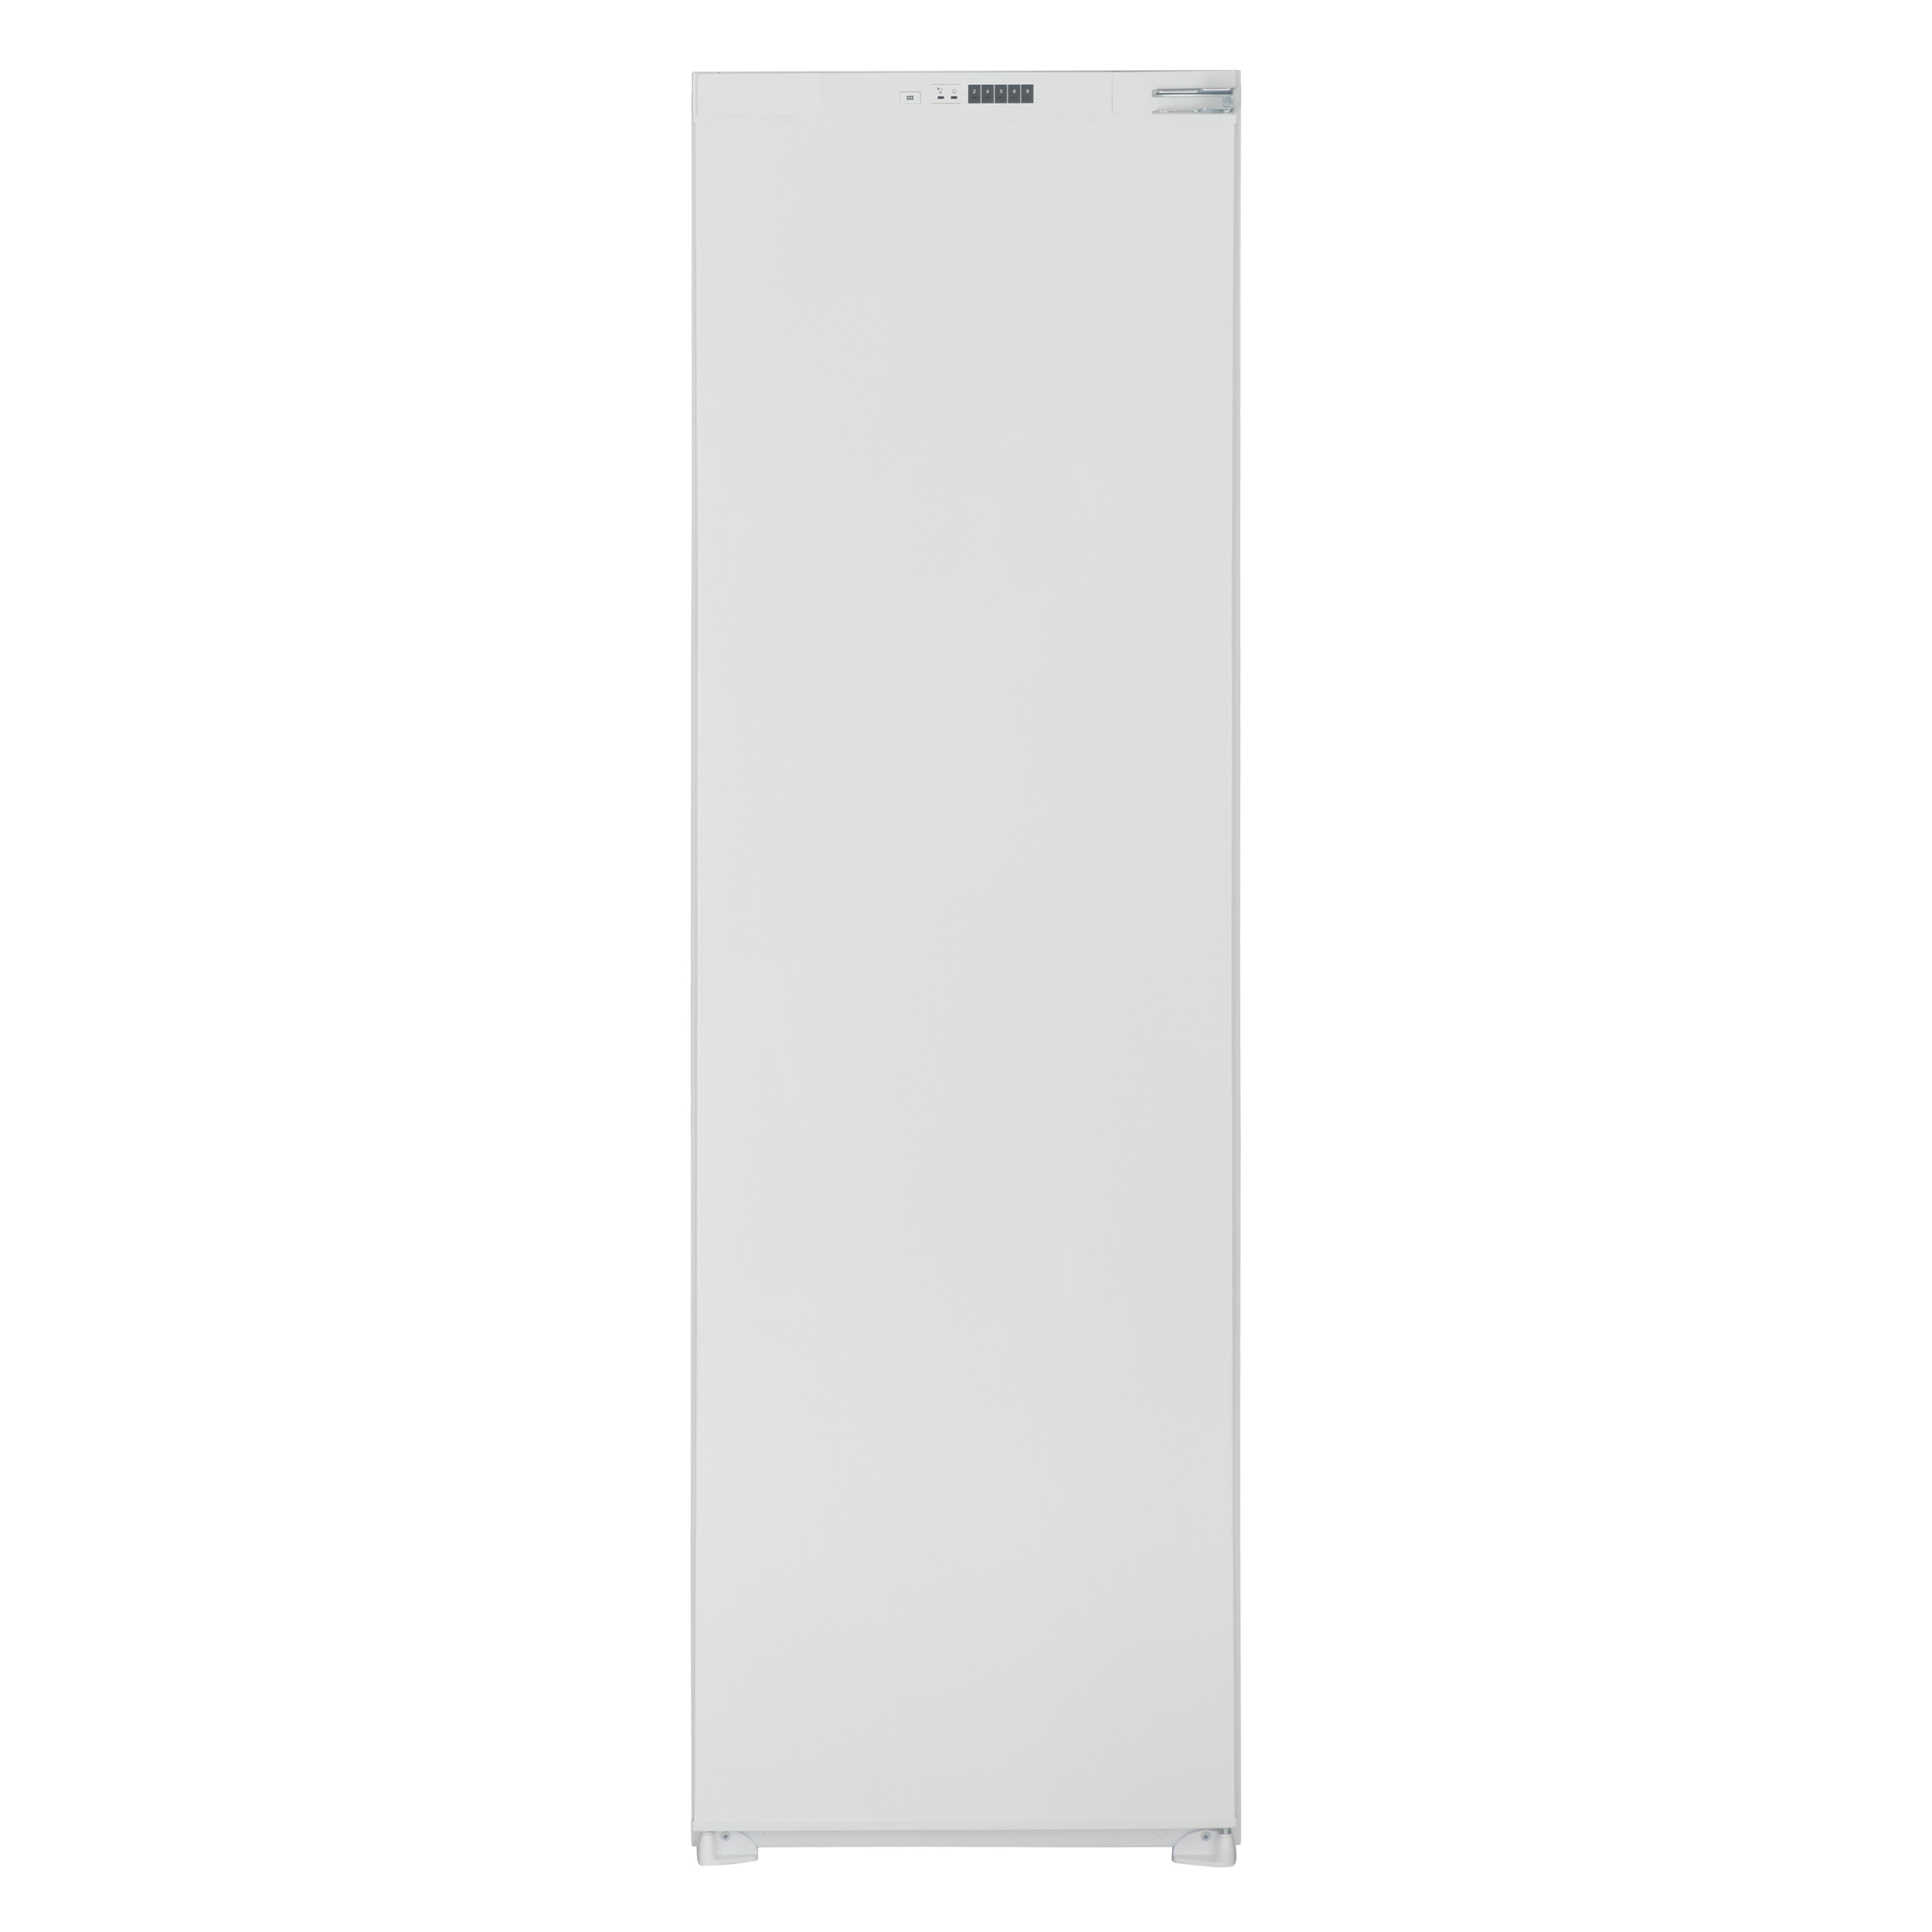 60cm larder refrigerator, with a gross capacity of 303L. Features a manual thermostat & reversible doors. 